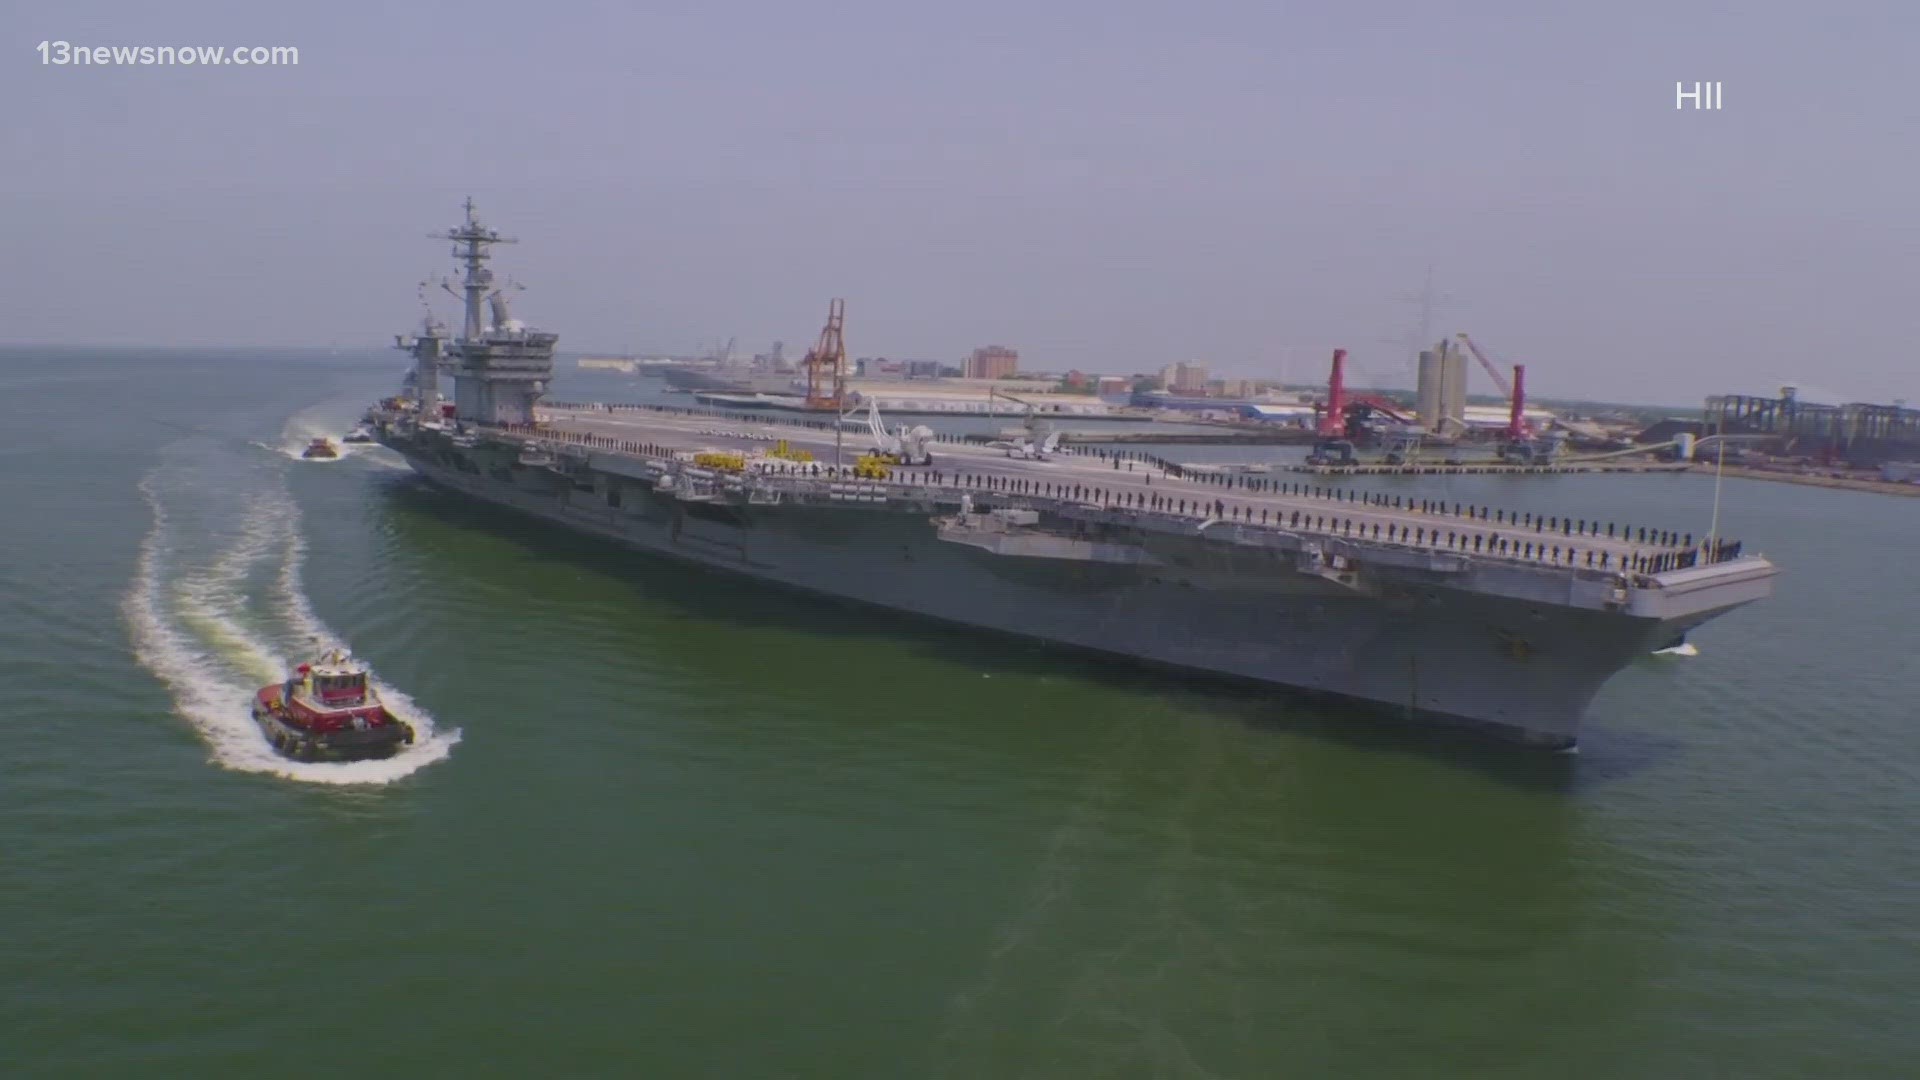 George Washington will relieve USS Ronald Reagan as forward-deployed naval forces aircraft carrier for TEAM SOUTHCOM during a "historic carrier swap" this summer.